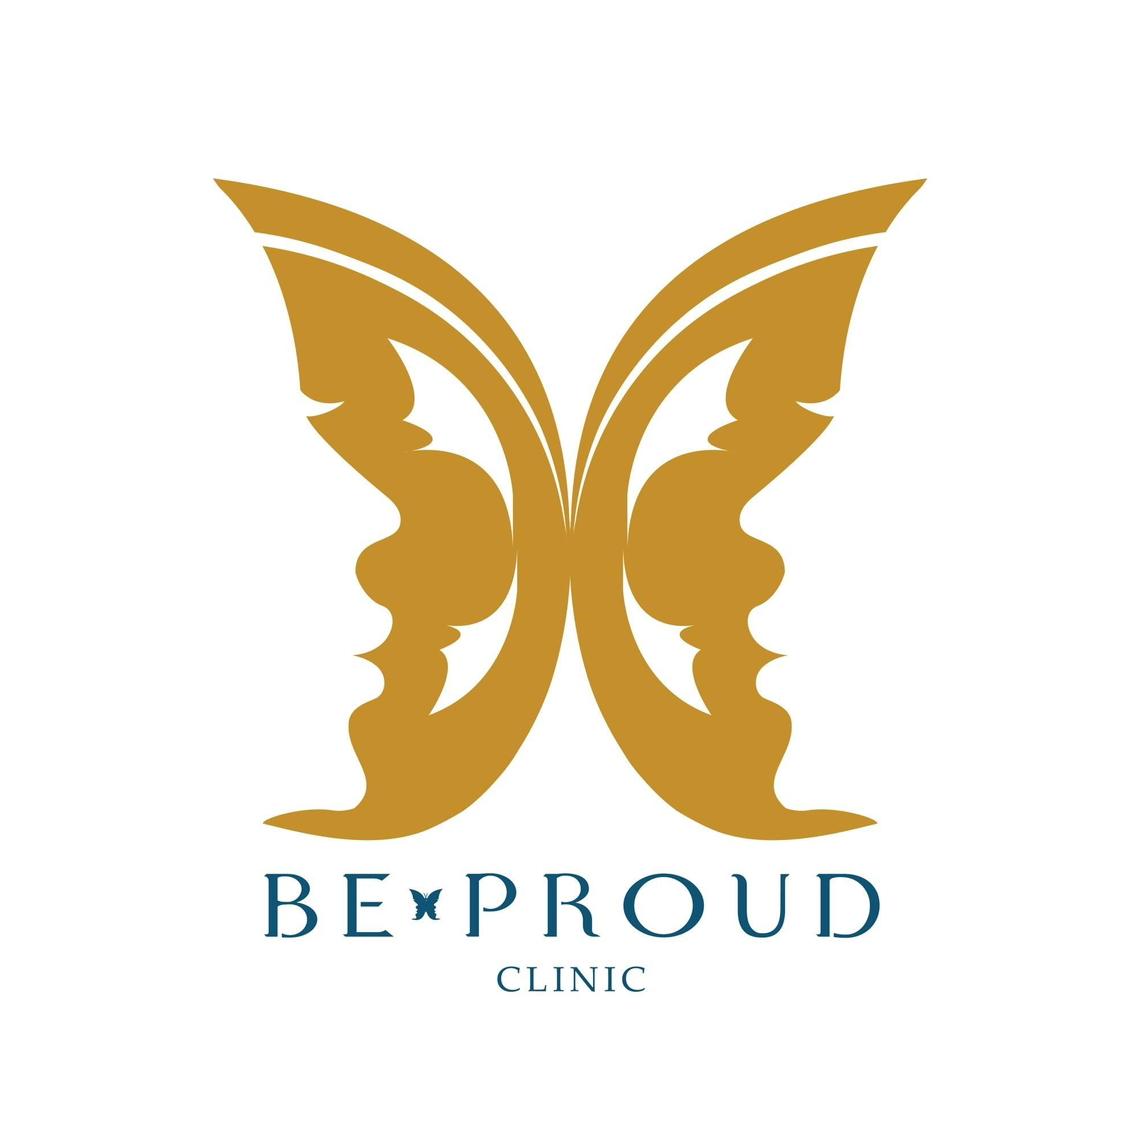 Beproud Clinic's images